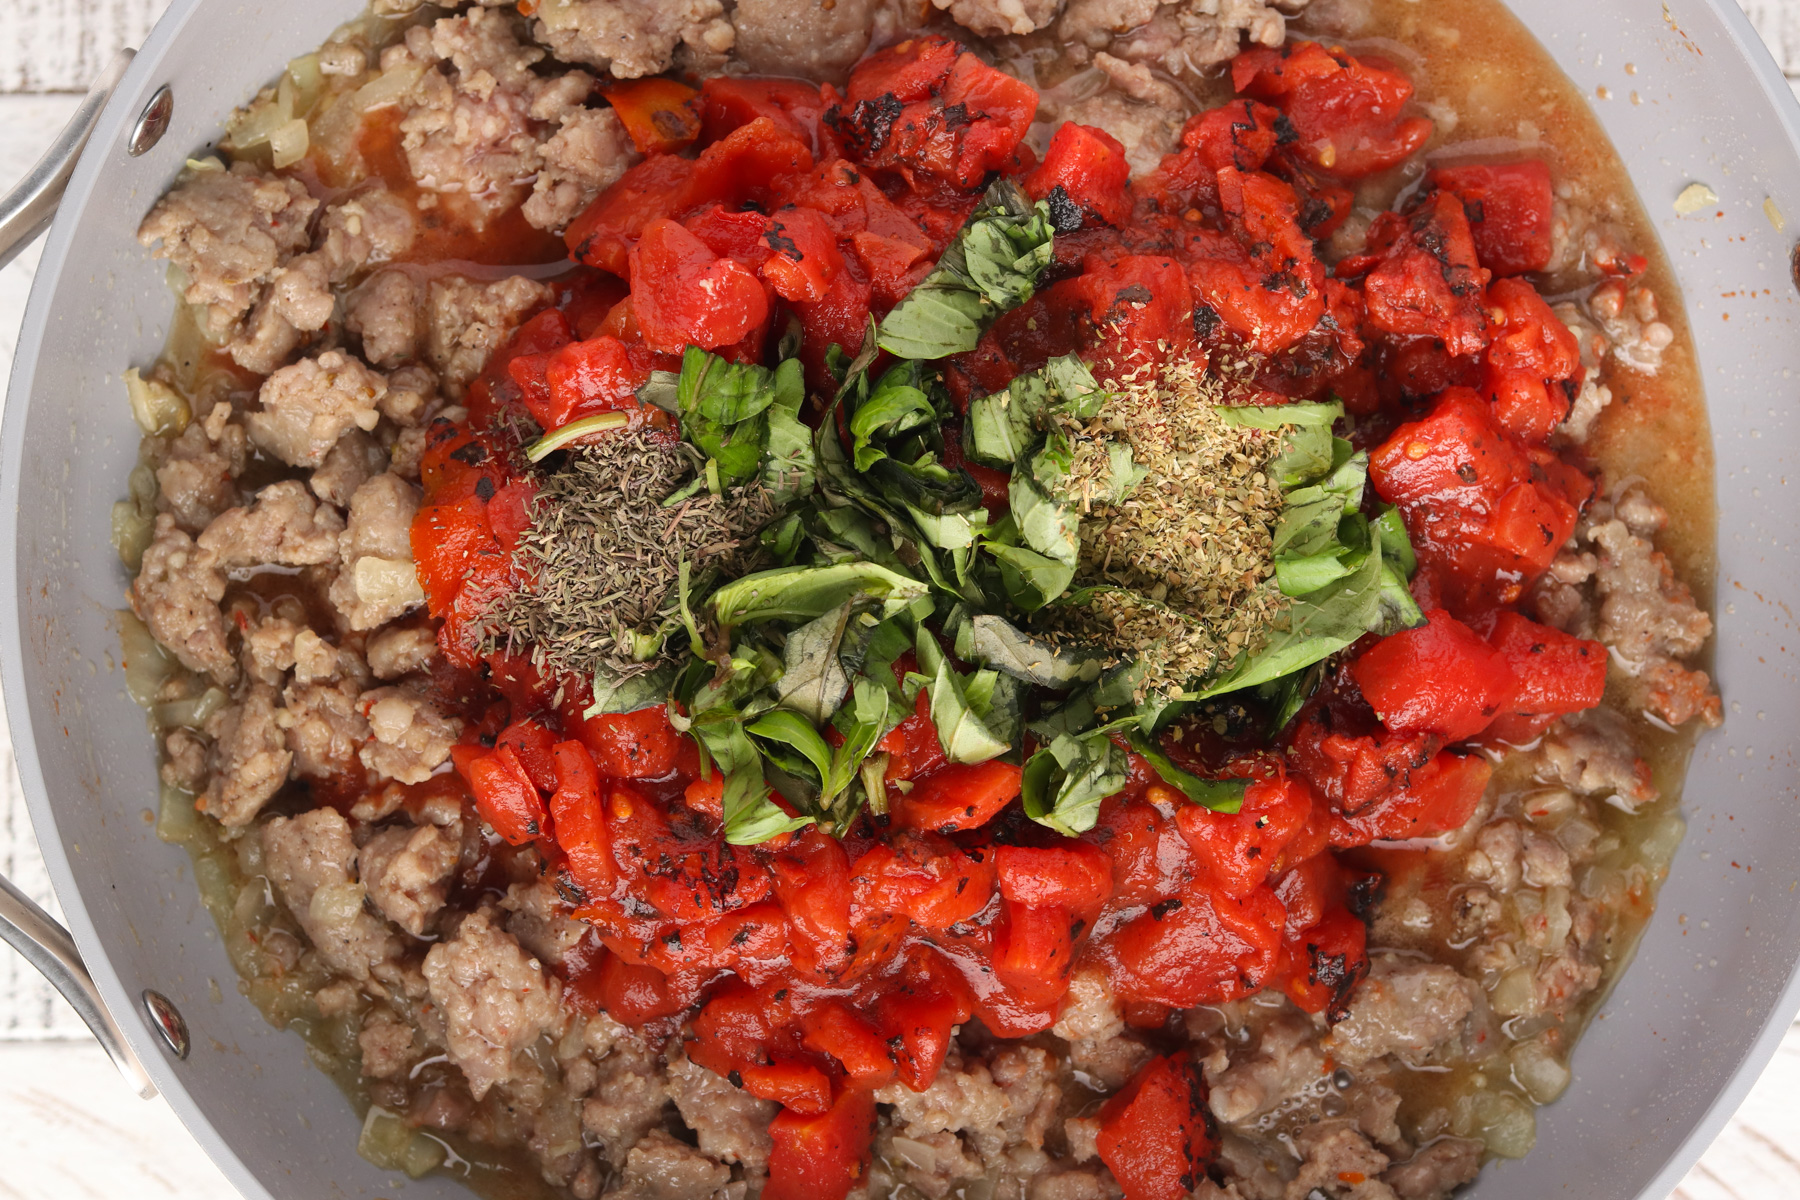  Step 3 - Add diced tomatoes, seasonings and tomato paste to meat sauce.